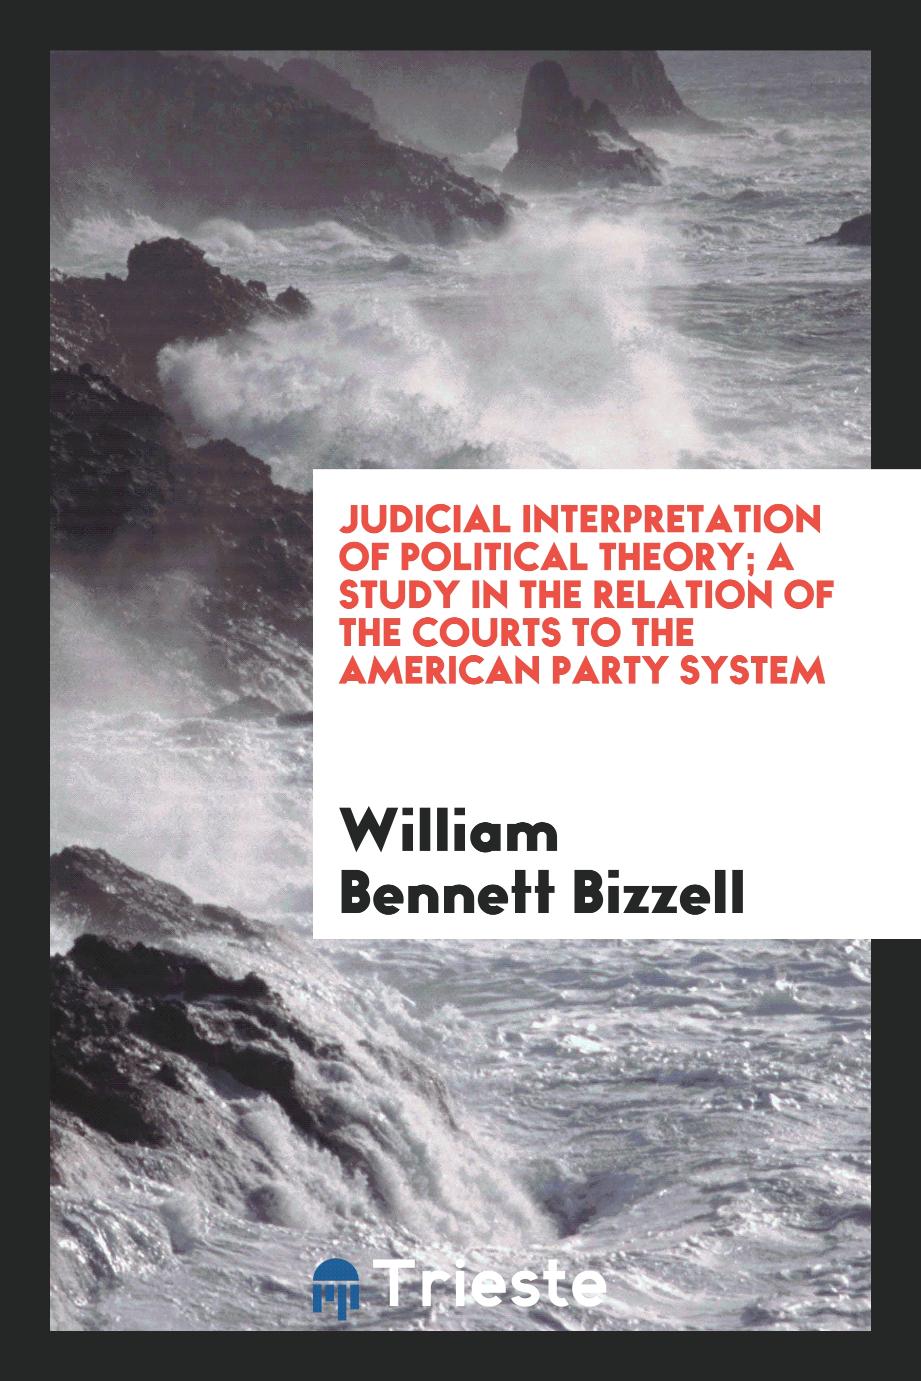 Judicial interpretation of political theory; a study in the relation of the courts to the American party system